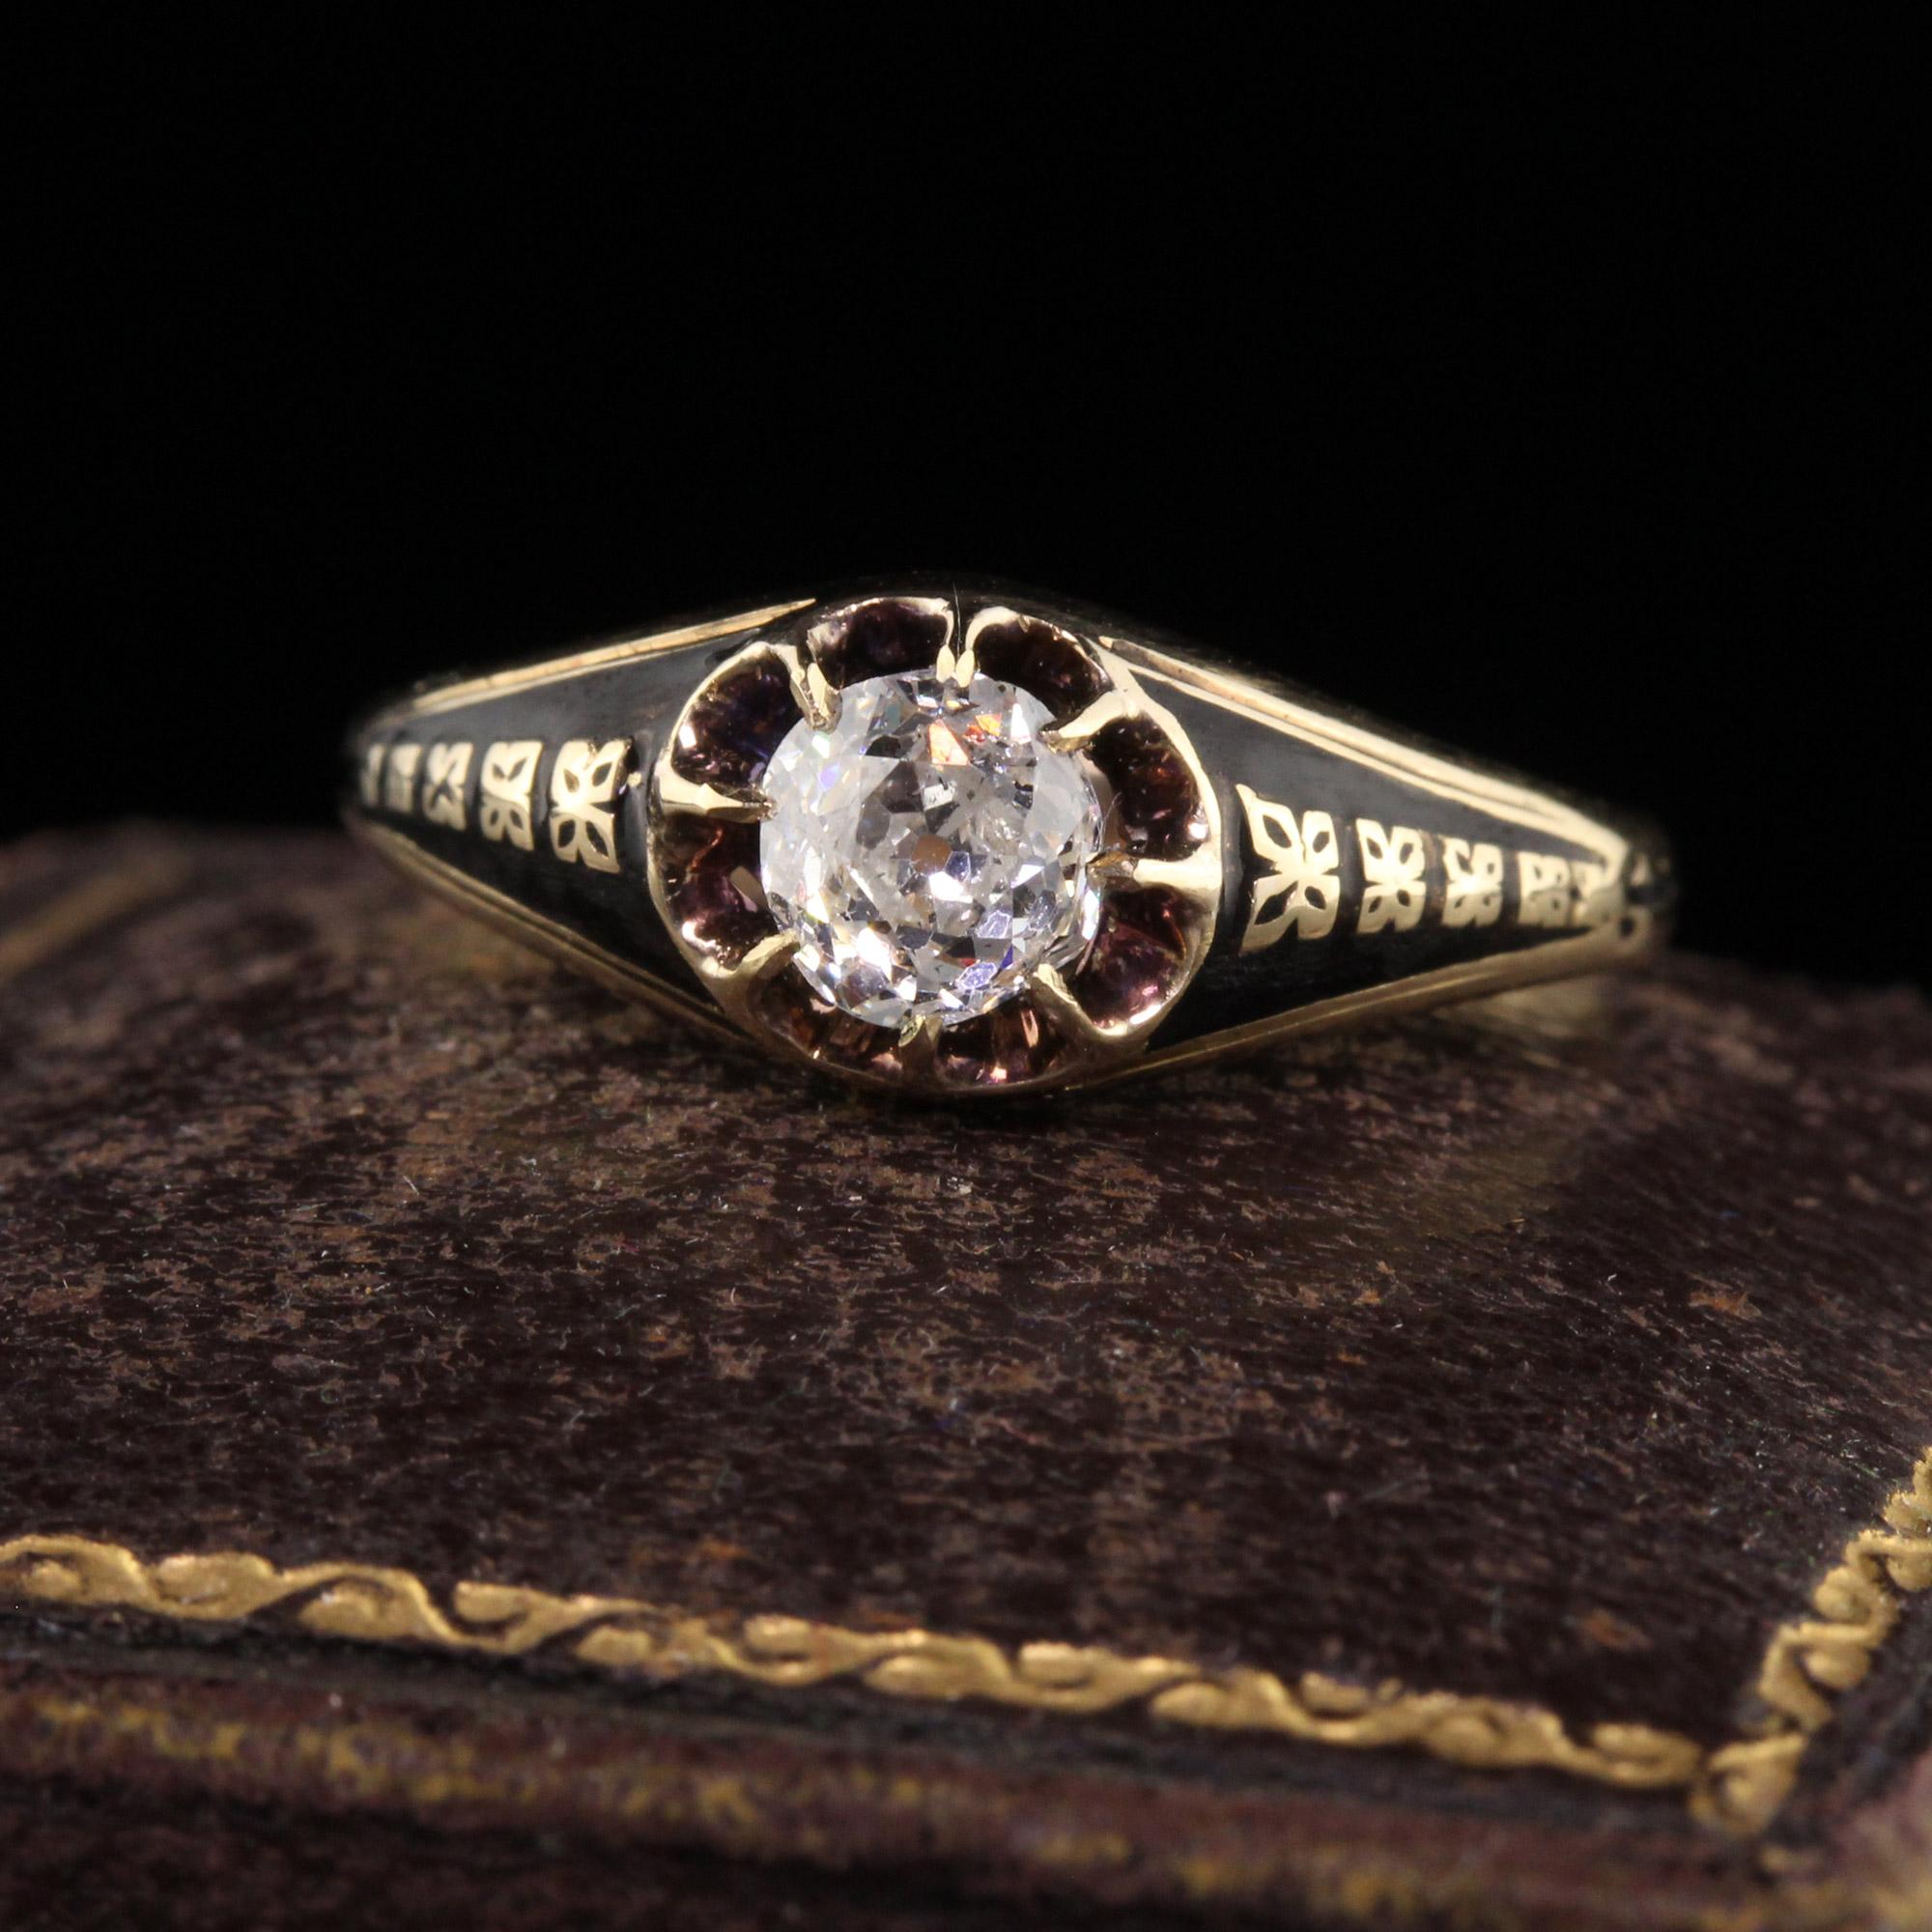 Beautiful Antique Victorian 14K Yellow Gold Old Mine Diamond Enamel Engagement Ring - GIA. This gorgeous engagement ring is crafted in 14k yellow gold. The center holds a GIA certified old mine cut diamond that is brilliant and clean to the naked